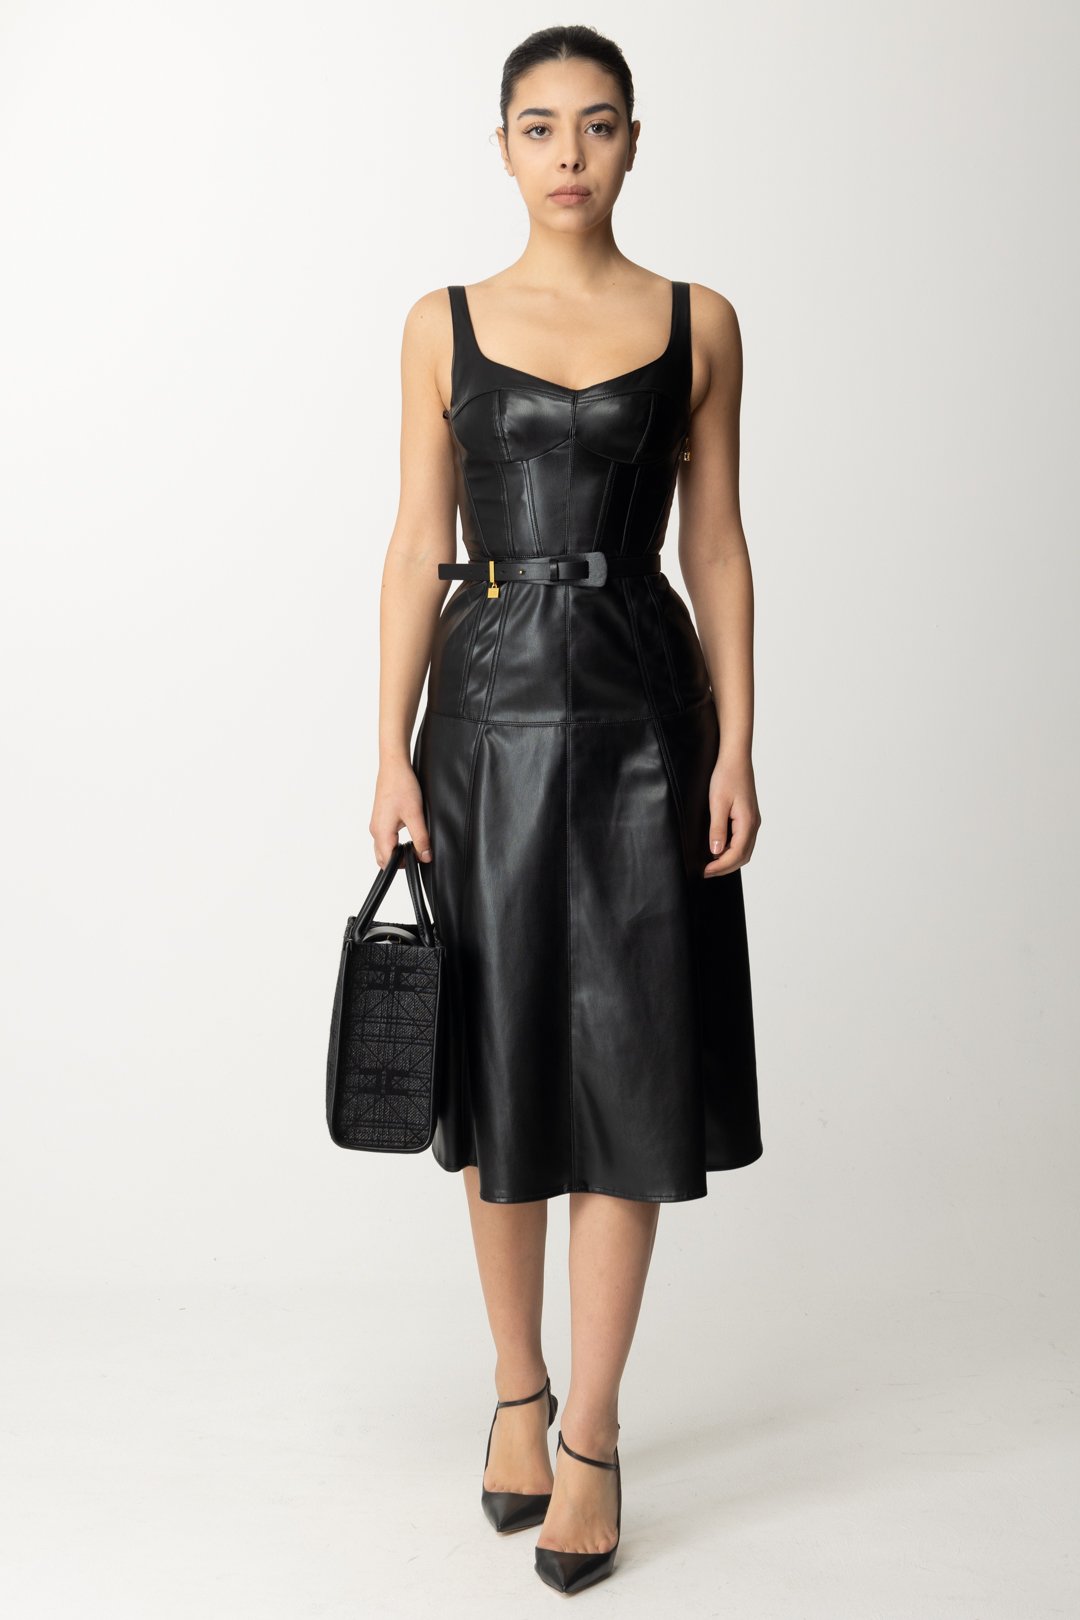 Preview: Elisabetta Franchi Leather effect dress with gold charm and belt Nero